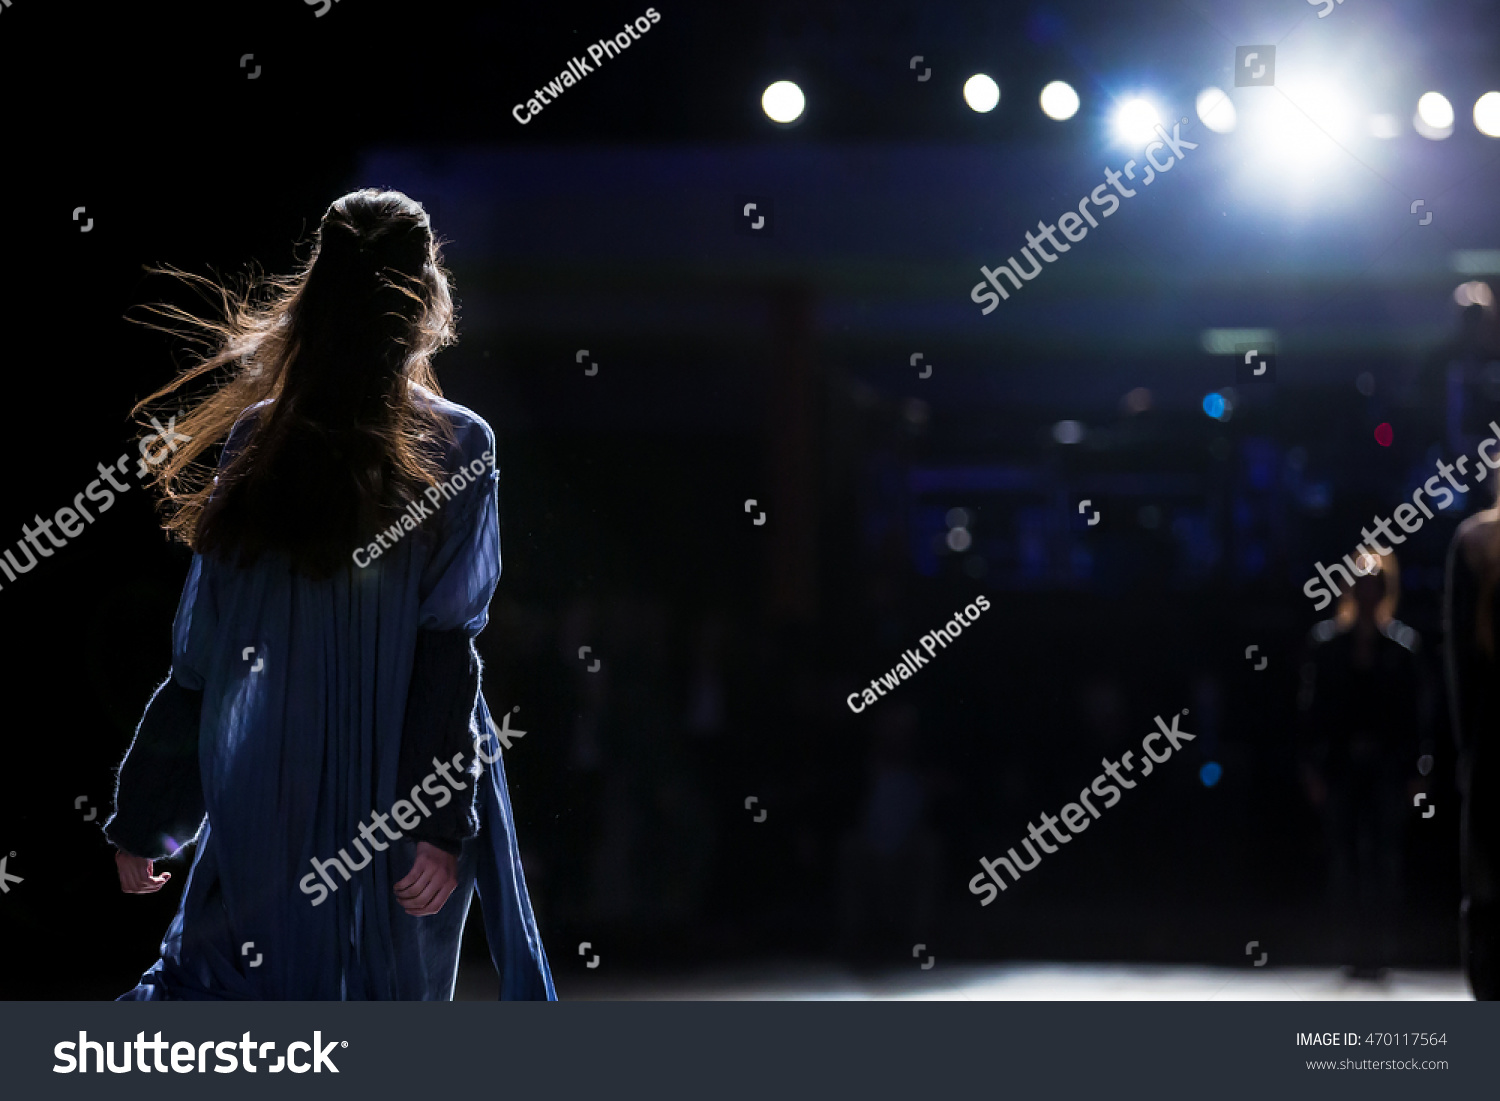 Fashion Show, Catwalk Event, Runway Show themed photo #470117564